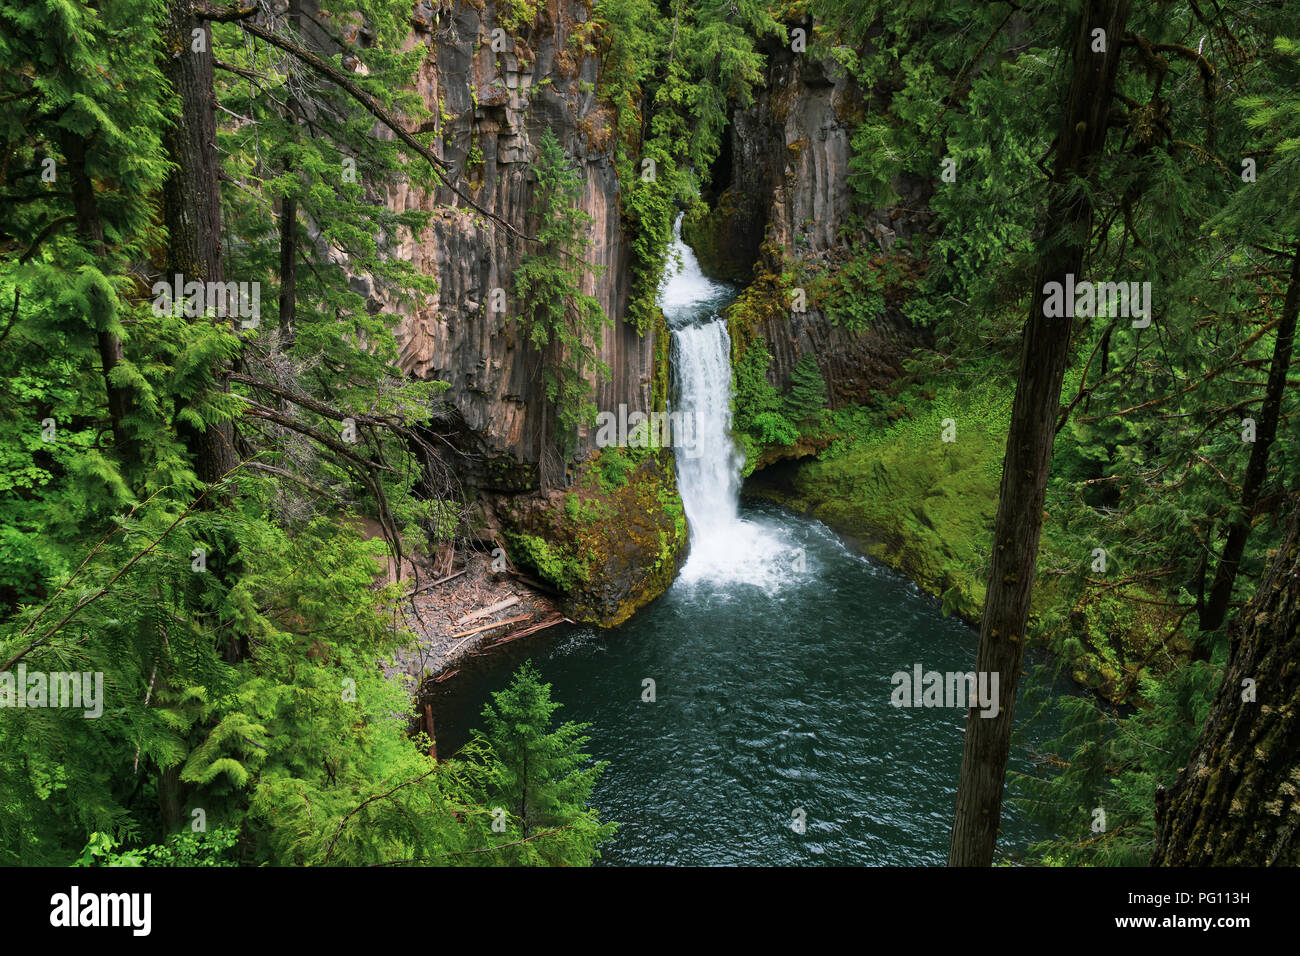 Overlooking view of the Toketee Falls in the North Umpqua National Forest, Oregon, USA. Stock Photo